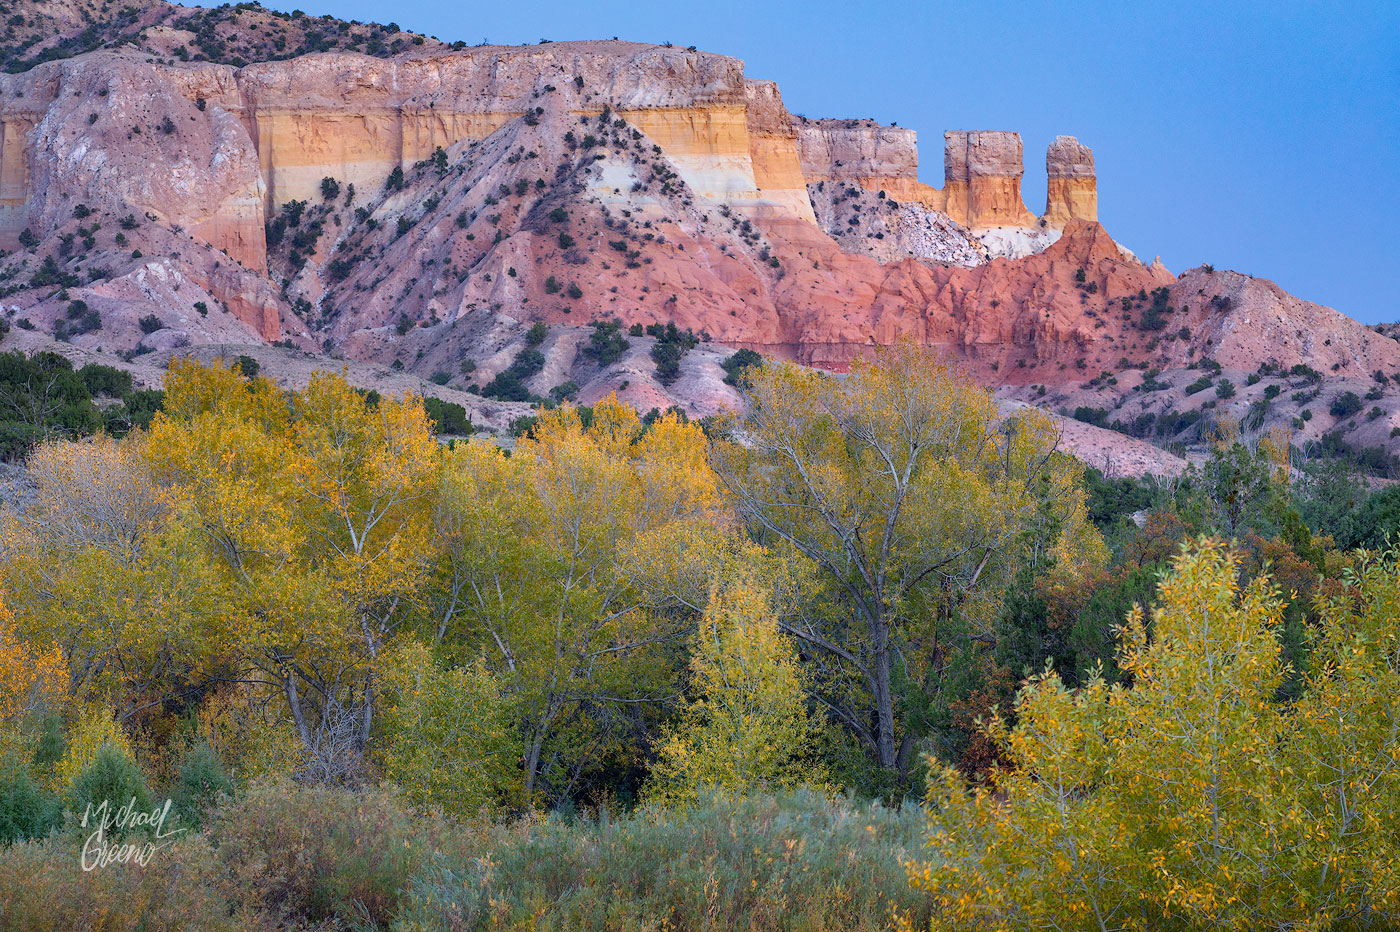 Blue hour accentuates the colorful rock formations of Northern New Mexico.